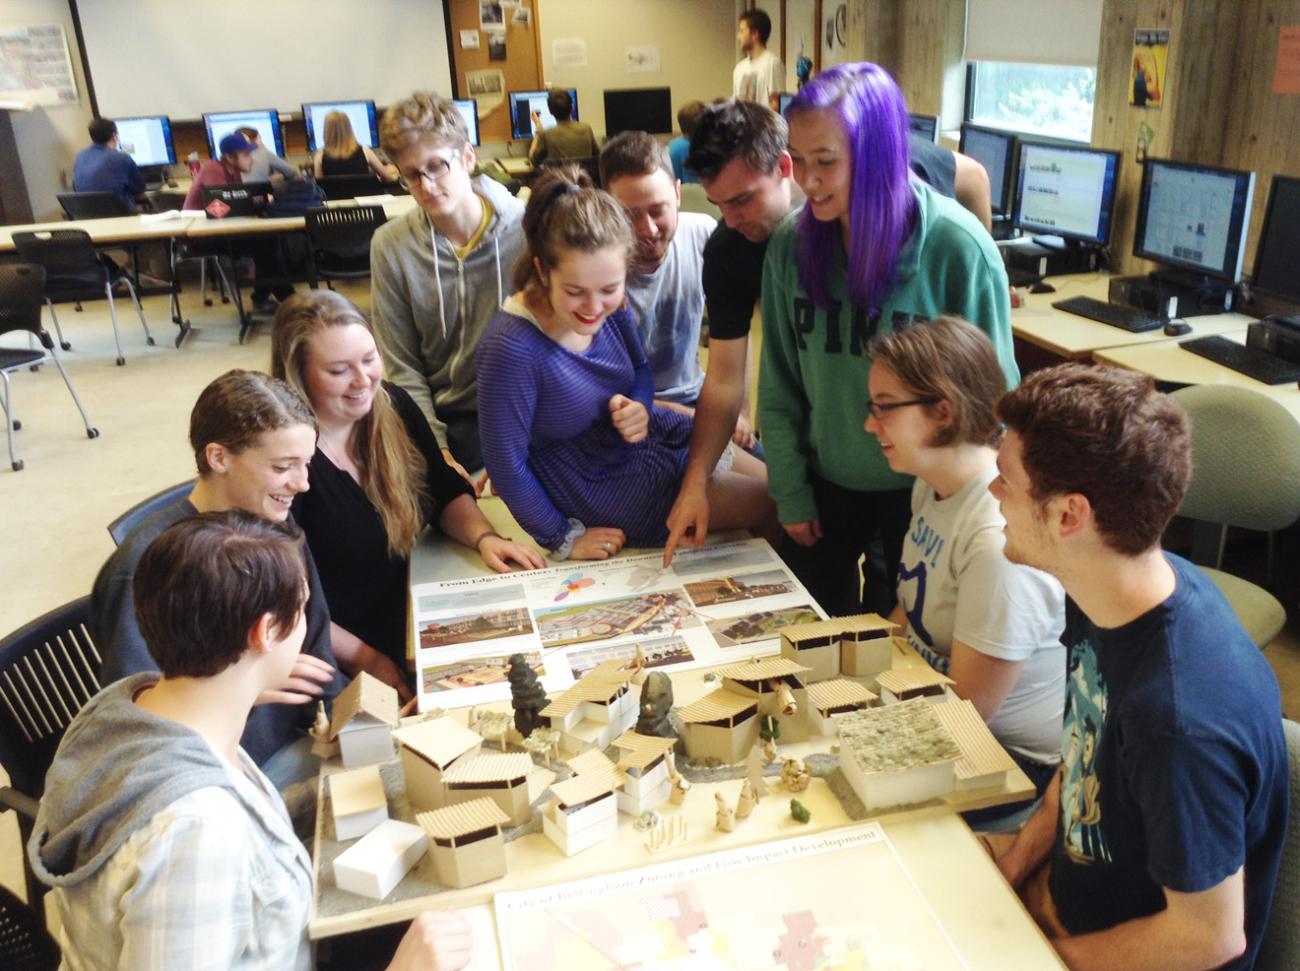 Students around a table looking at designs